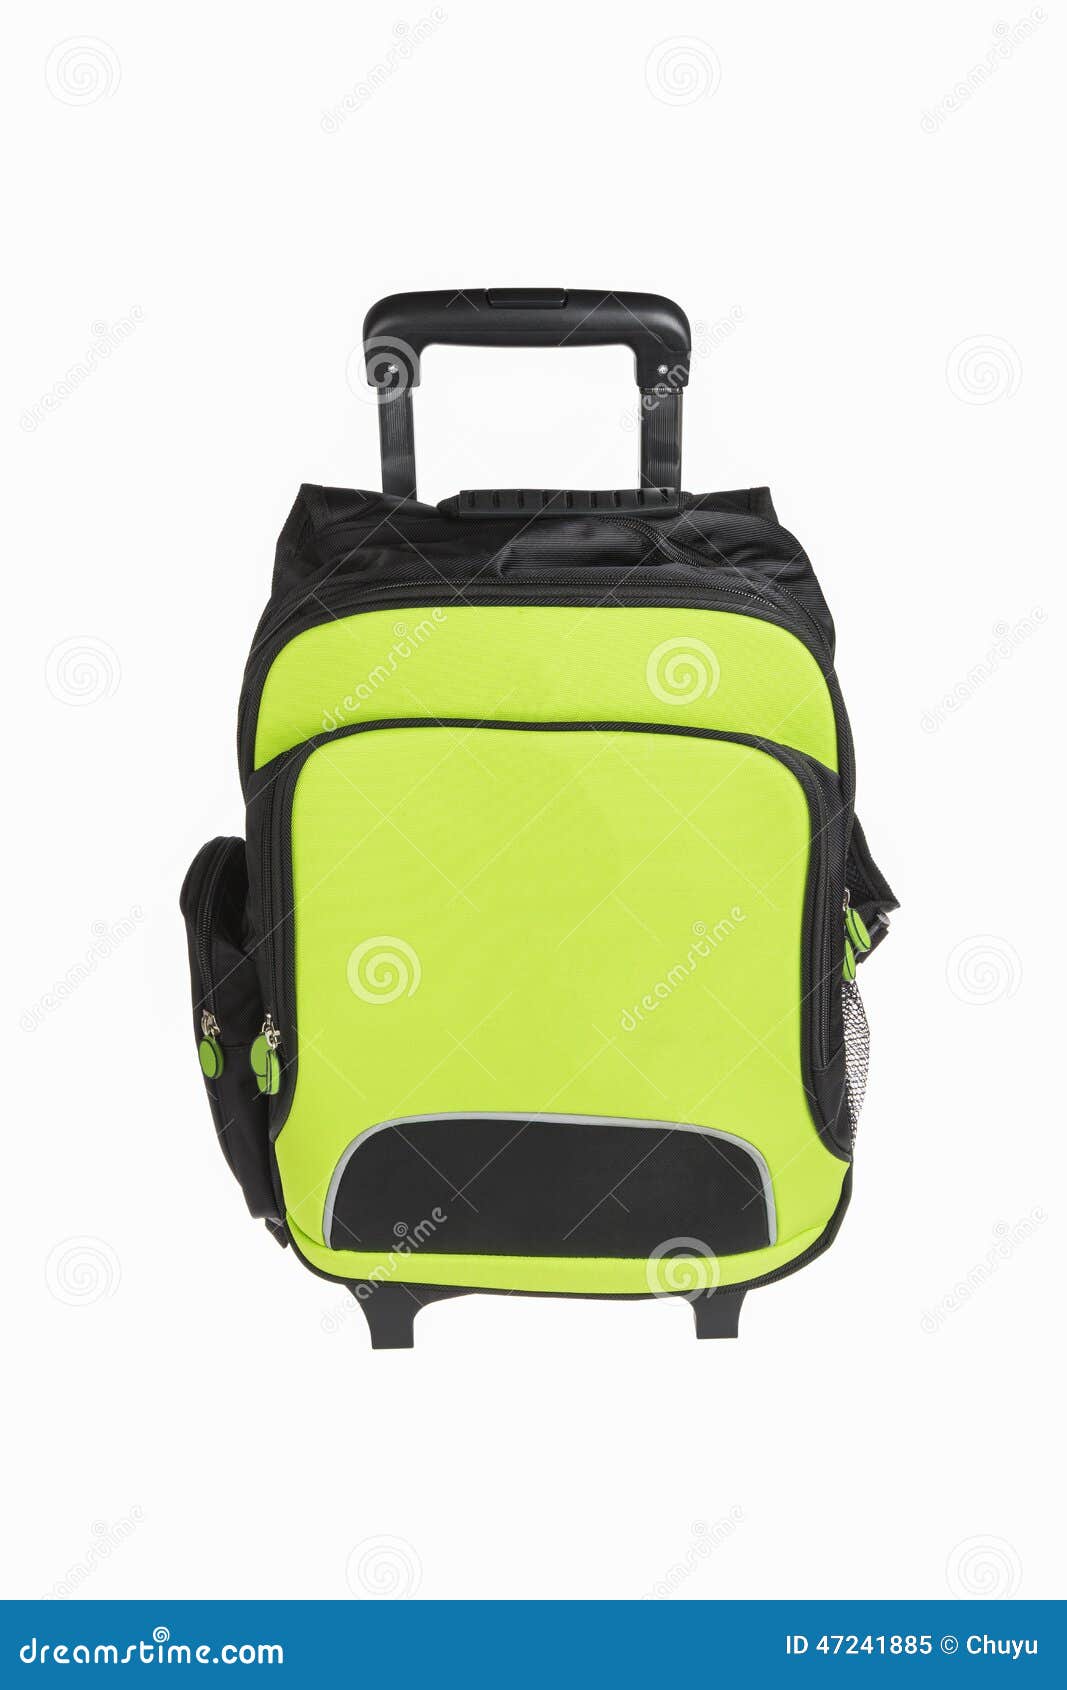 https://thumbs.dreamstime.com/z/trolley-school-bag-isolated-white-background-47241885.jpg